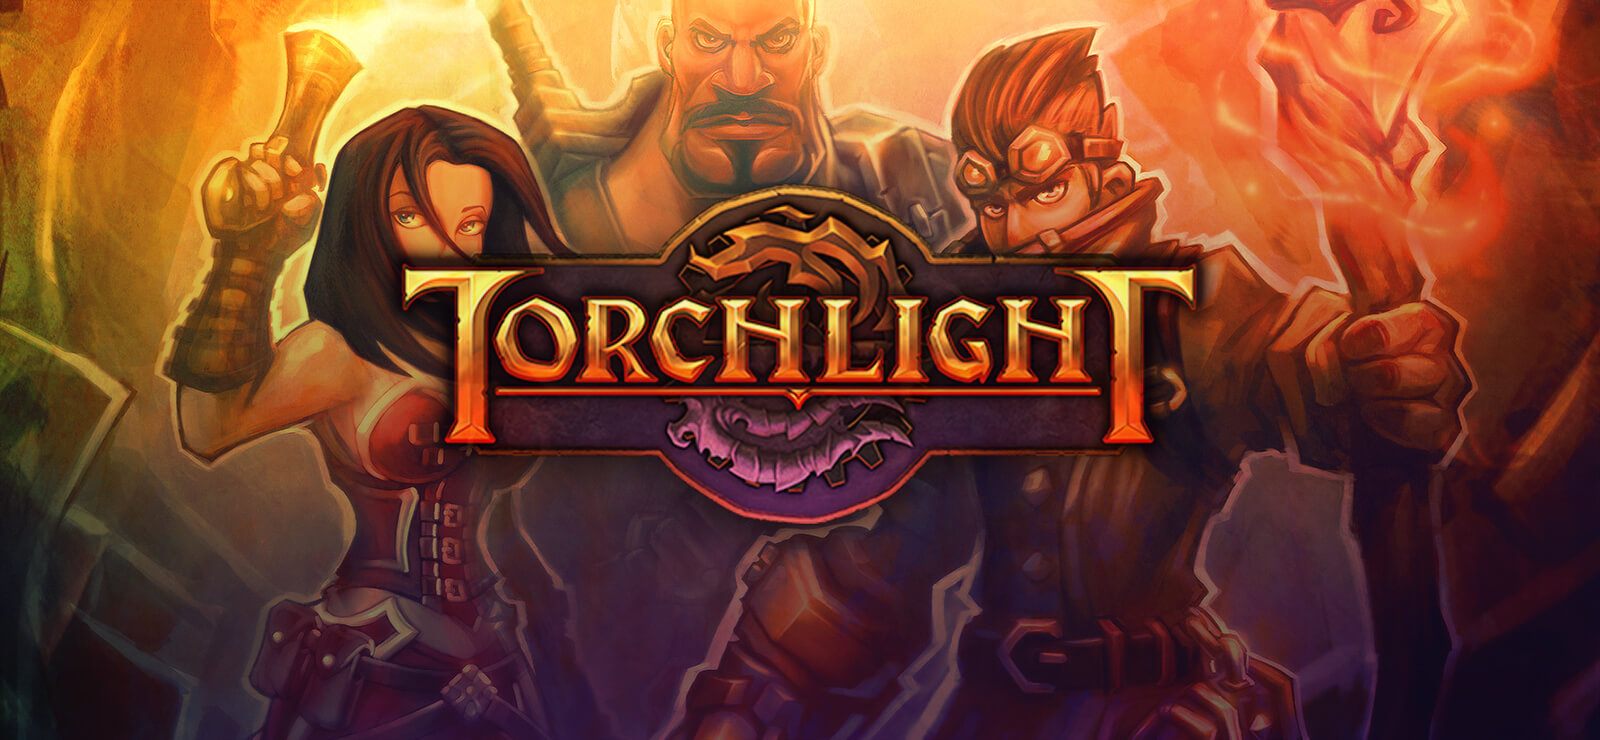 download torchlight 2 game for free